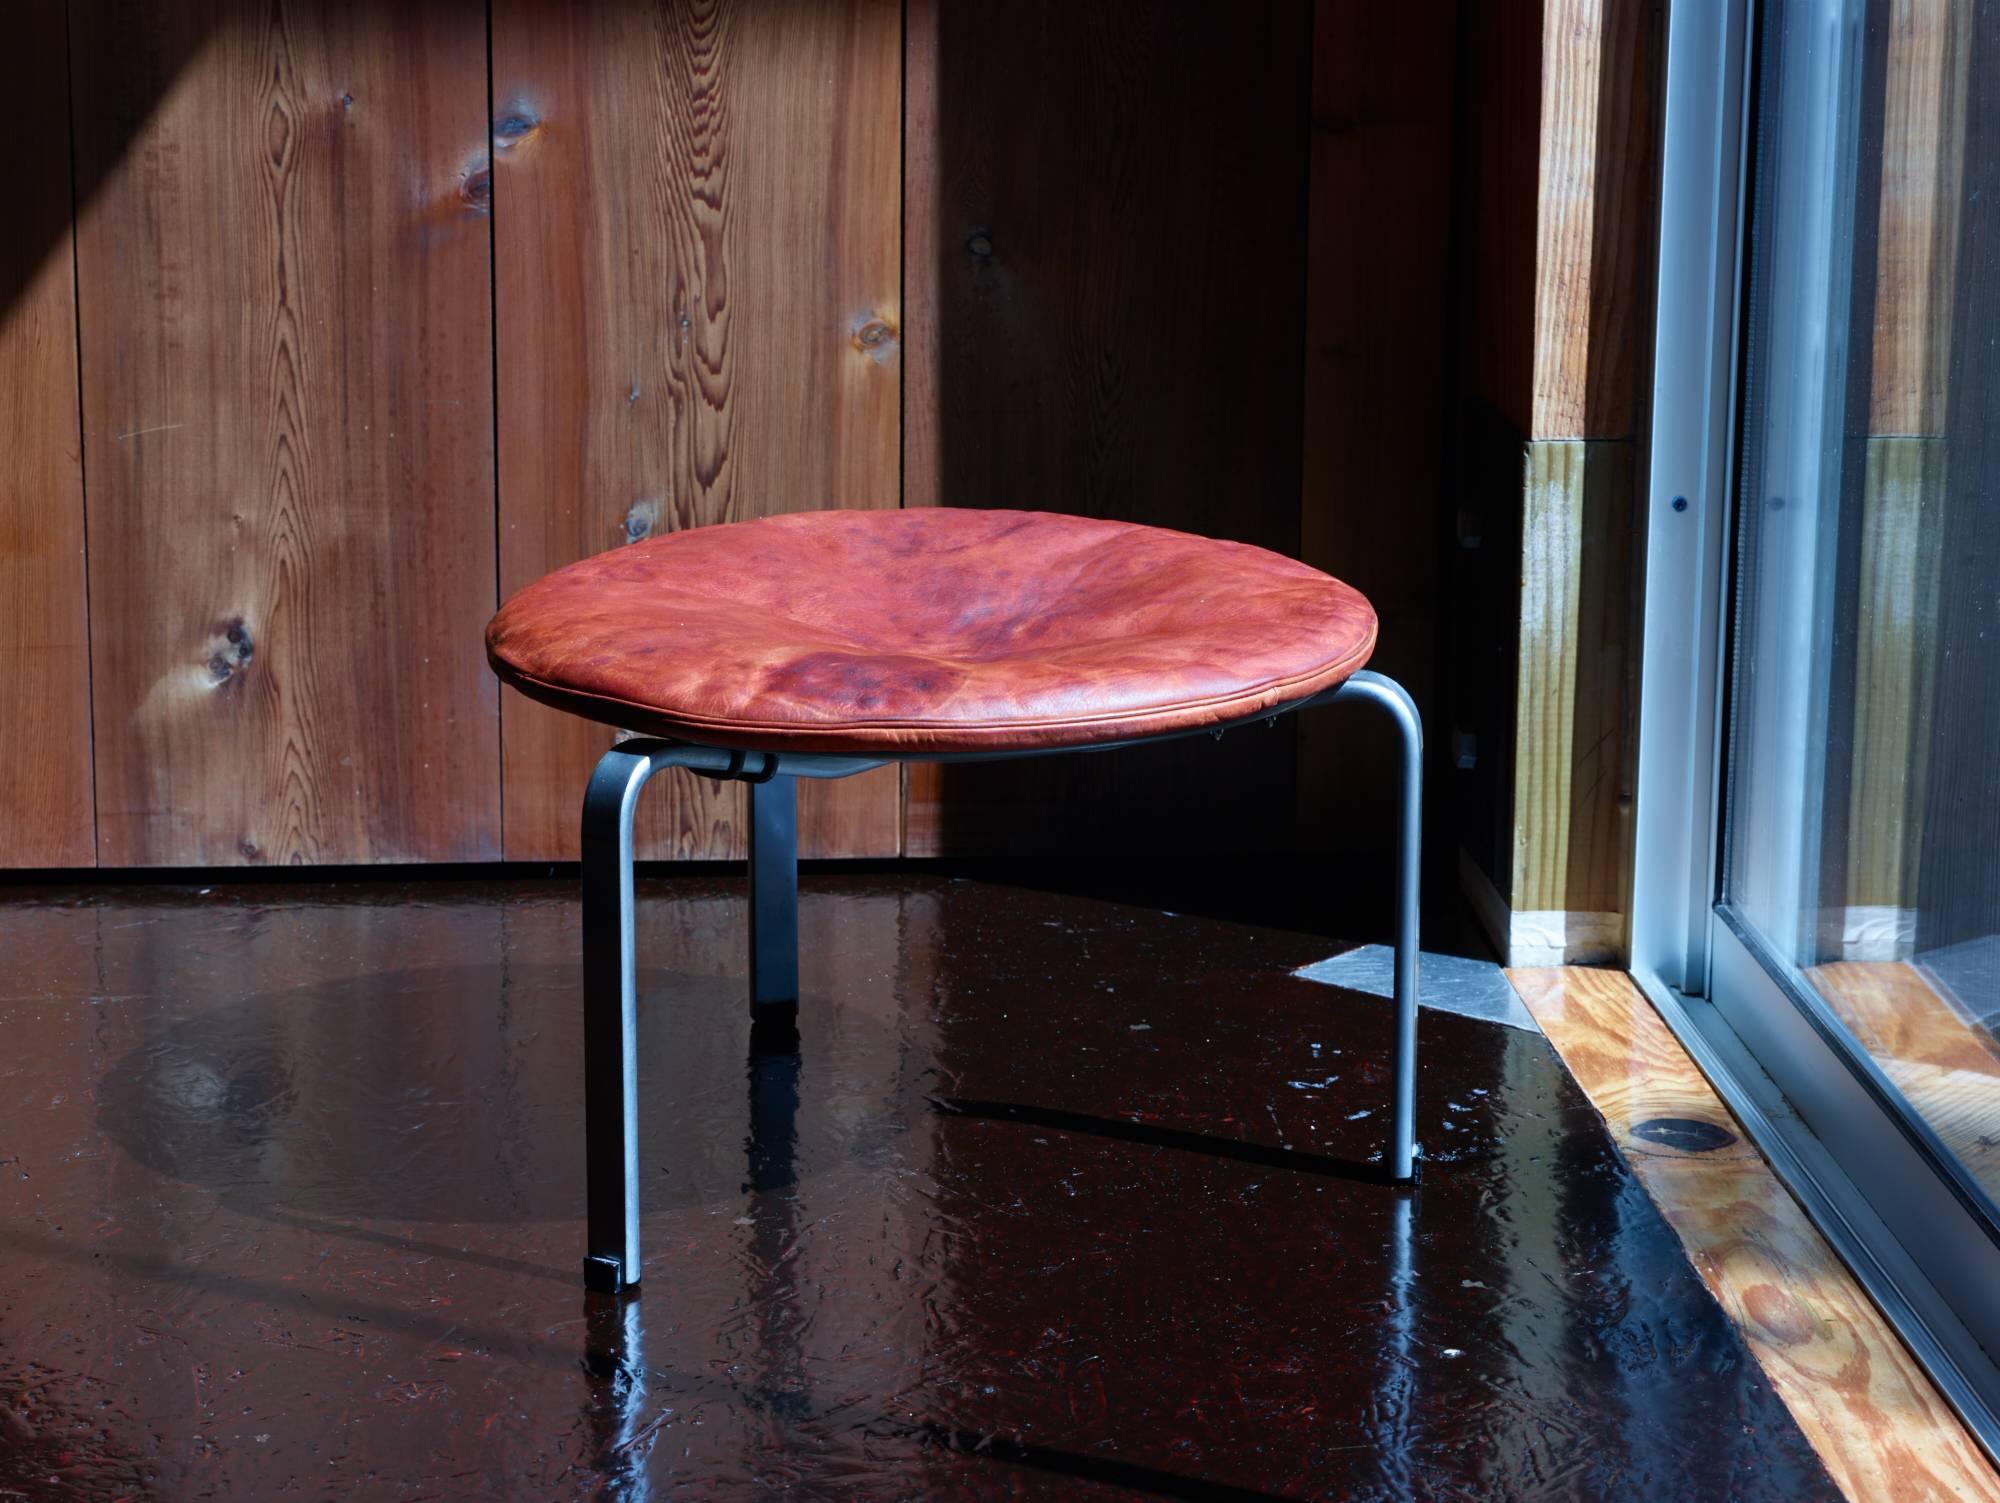 Poul Kjærholm, original condition.

PK 33 stool.

E. Kold Christensen,
Denmark, 1959.
Matte, chrome-plate spring steel with patinated, laminated wood.

Dimensions: 53.34 x 35.56 cm.
21 diameter x 14 H inches.